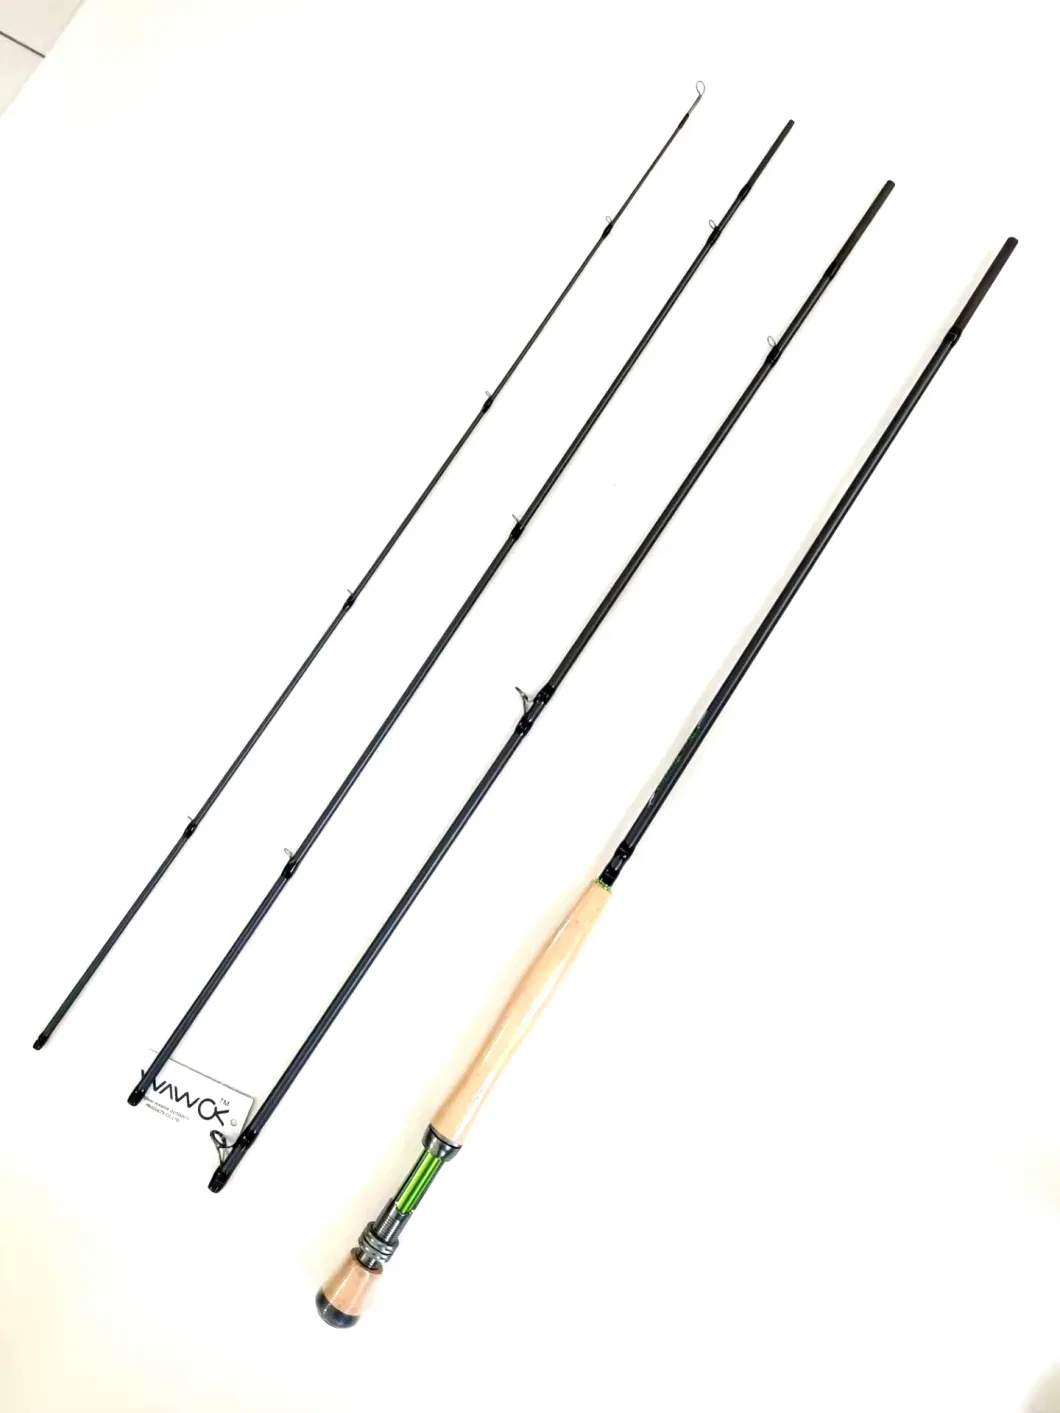 Graphite Carbon Fiber Blank Fly Rod Chromed Guide and Durable Fishing Rod